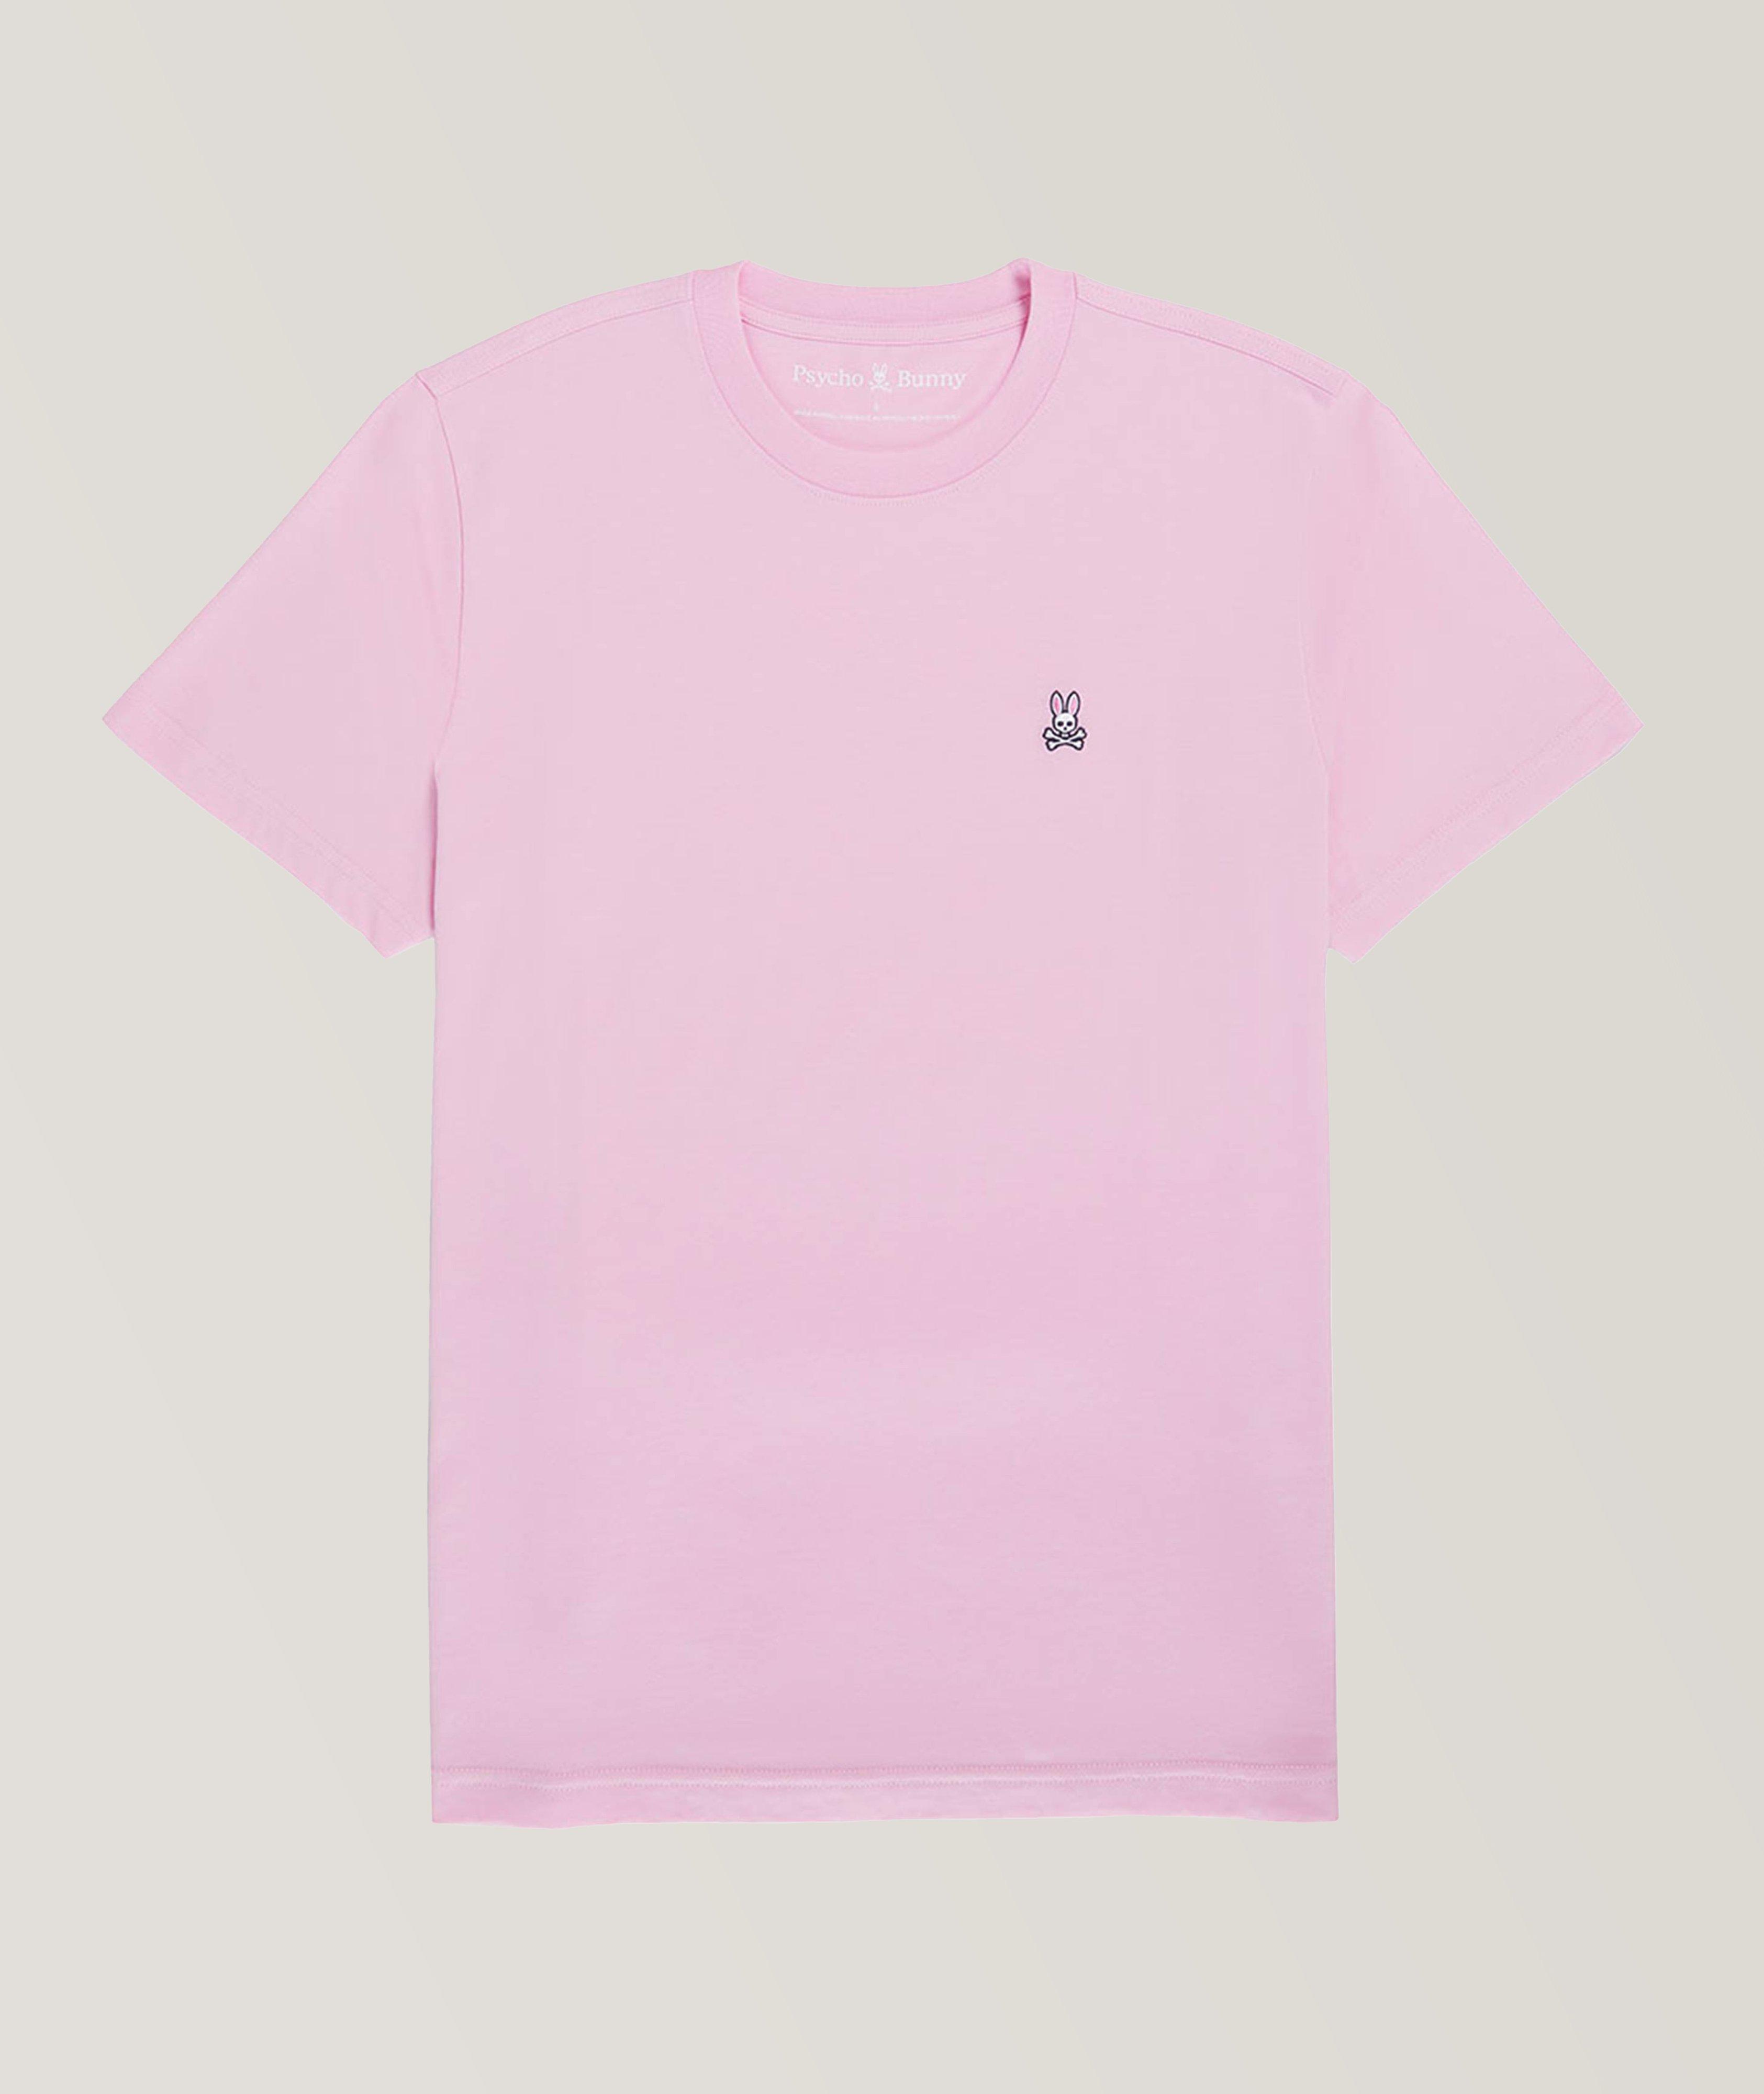 Classic Embroidered Bunny Logo T-Shirt image 0